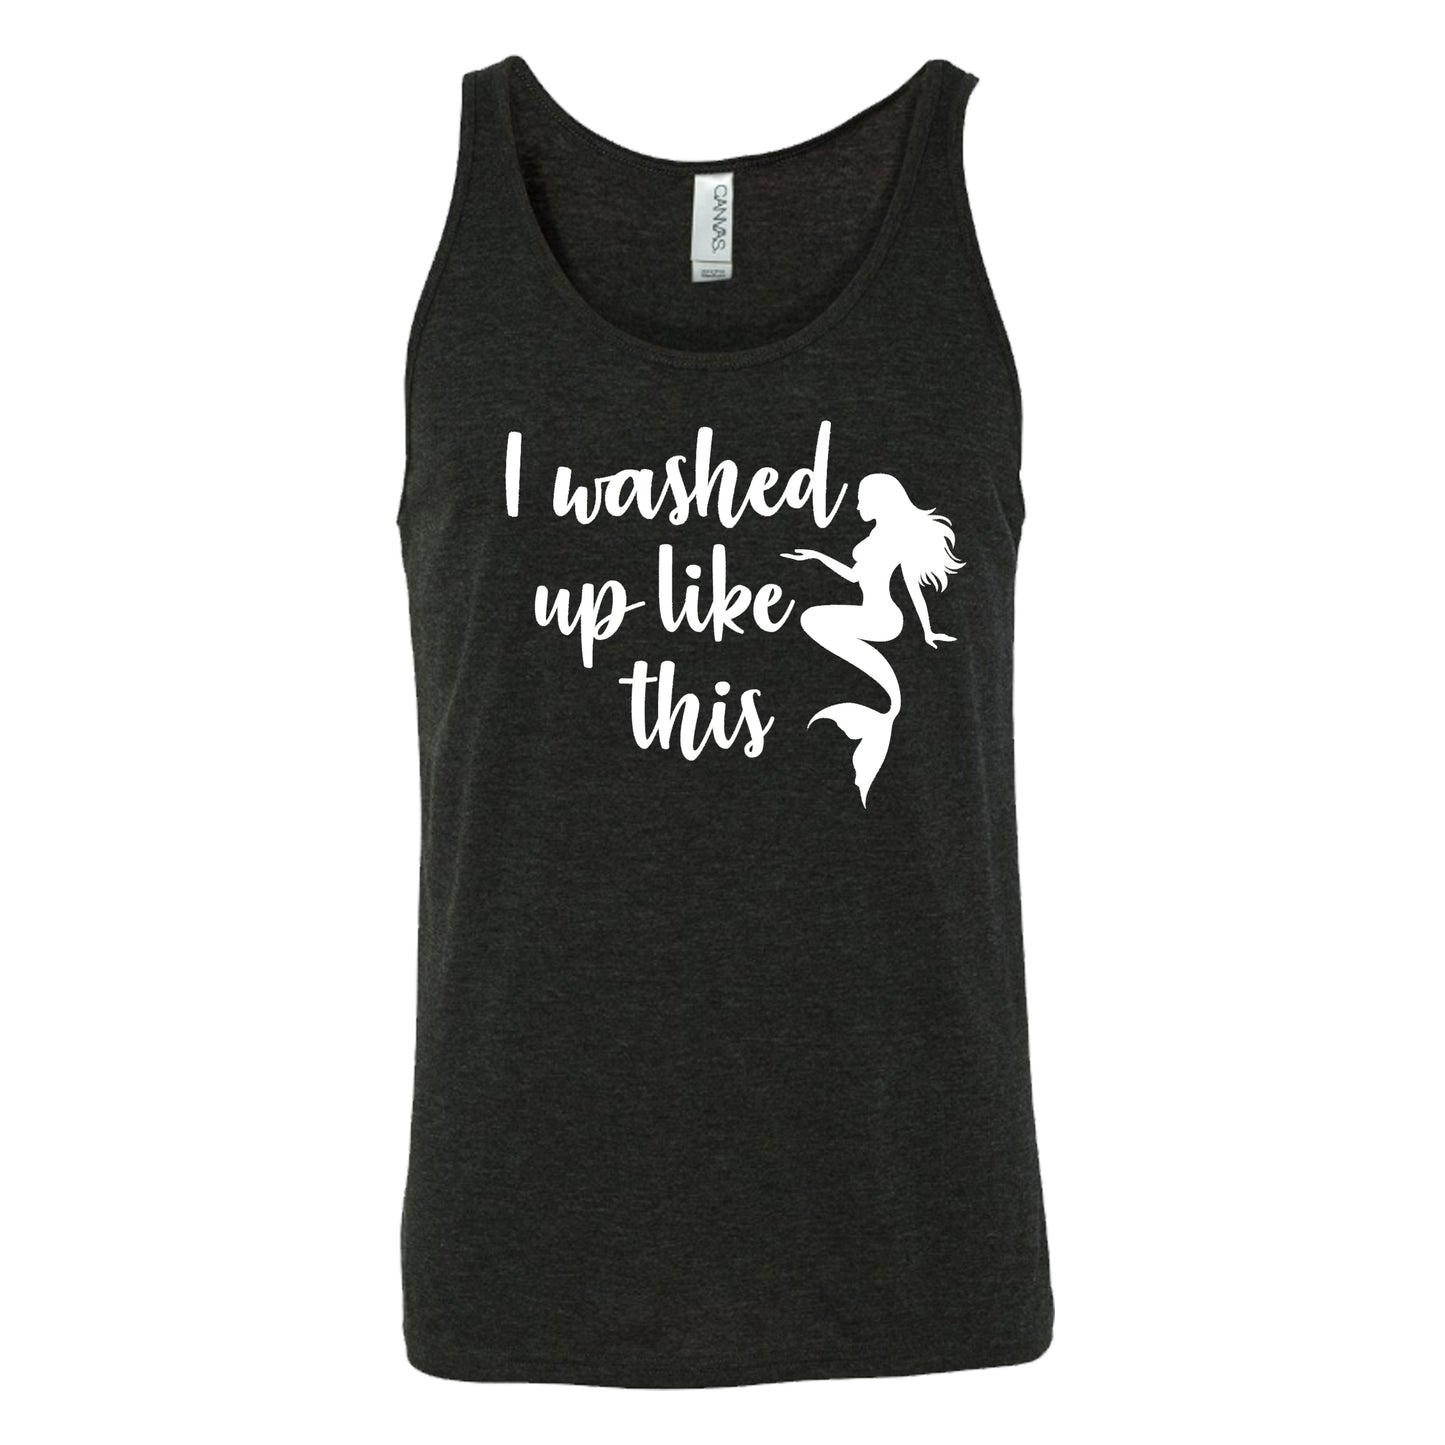 black unisex tank with the saying "i washed up like this" in white in the center